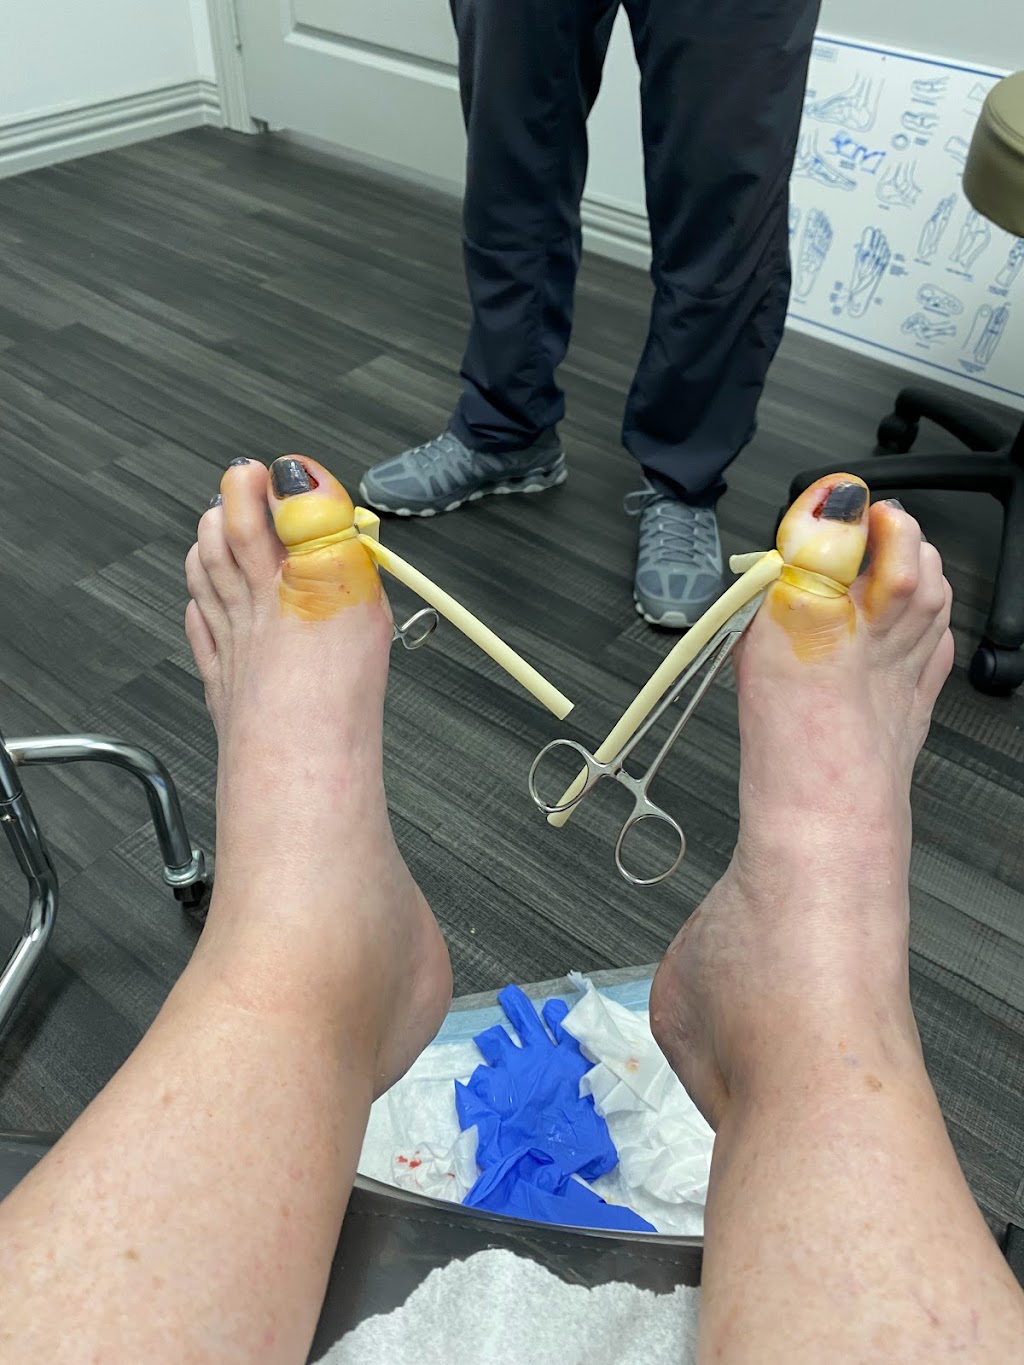 Flower Mound Foot and Ankle Center: Tommie Harris, DPM | 4491 Long Prairie Rd Suite 550, Flower Mound, TX 75028, USA | Phone: (972) 200-9823